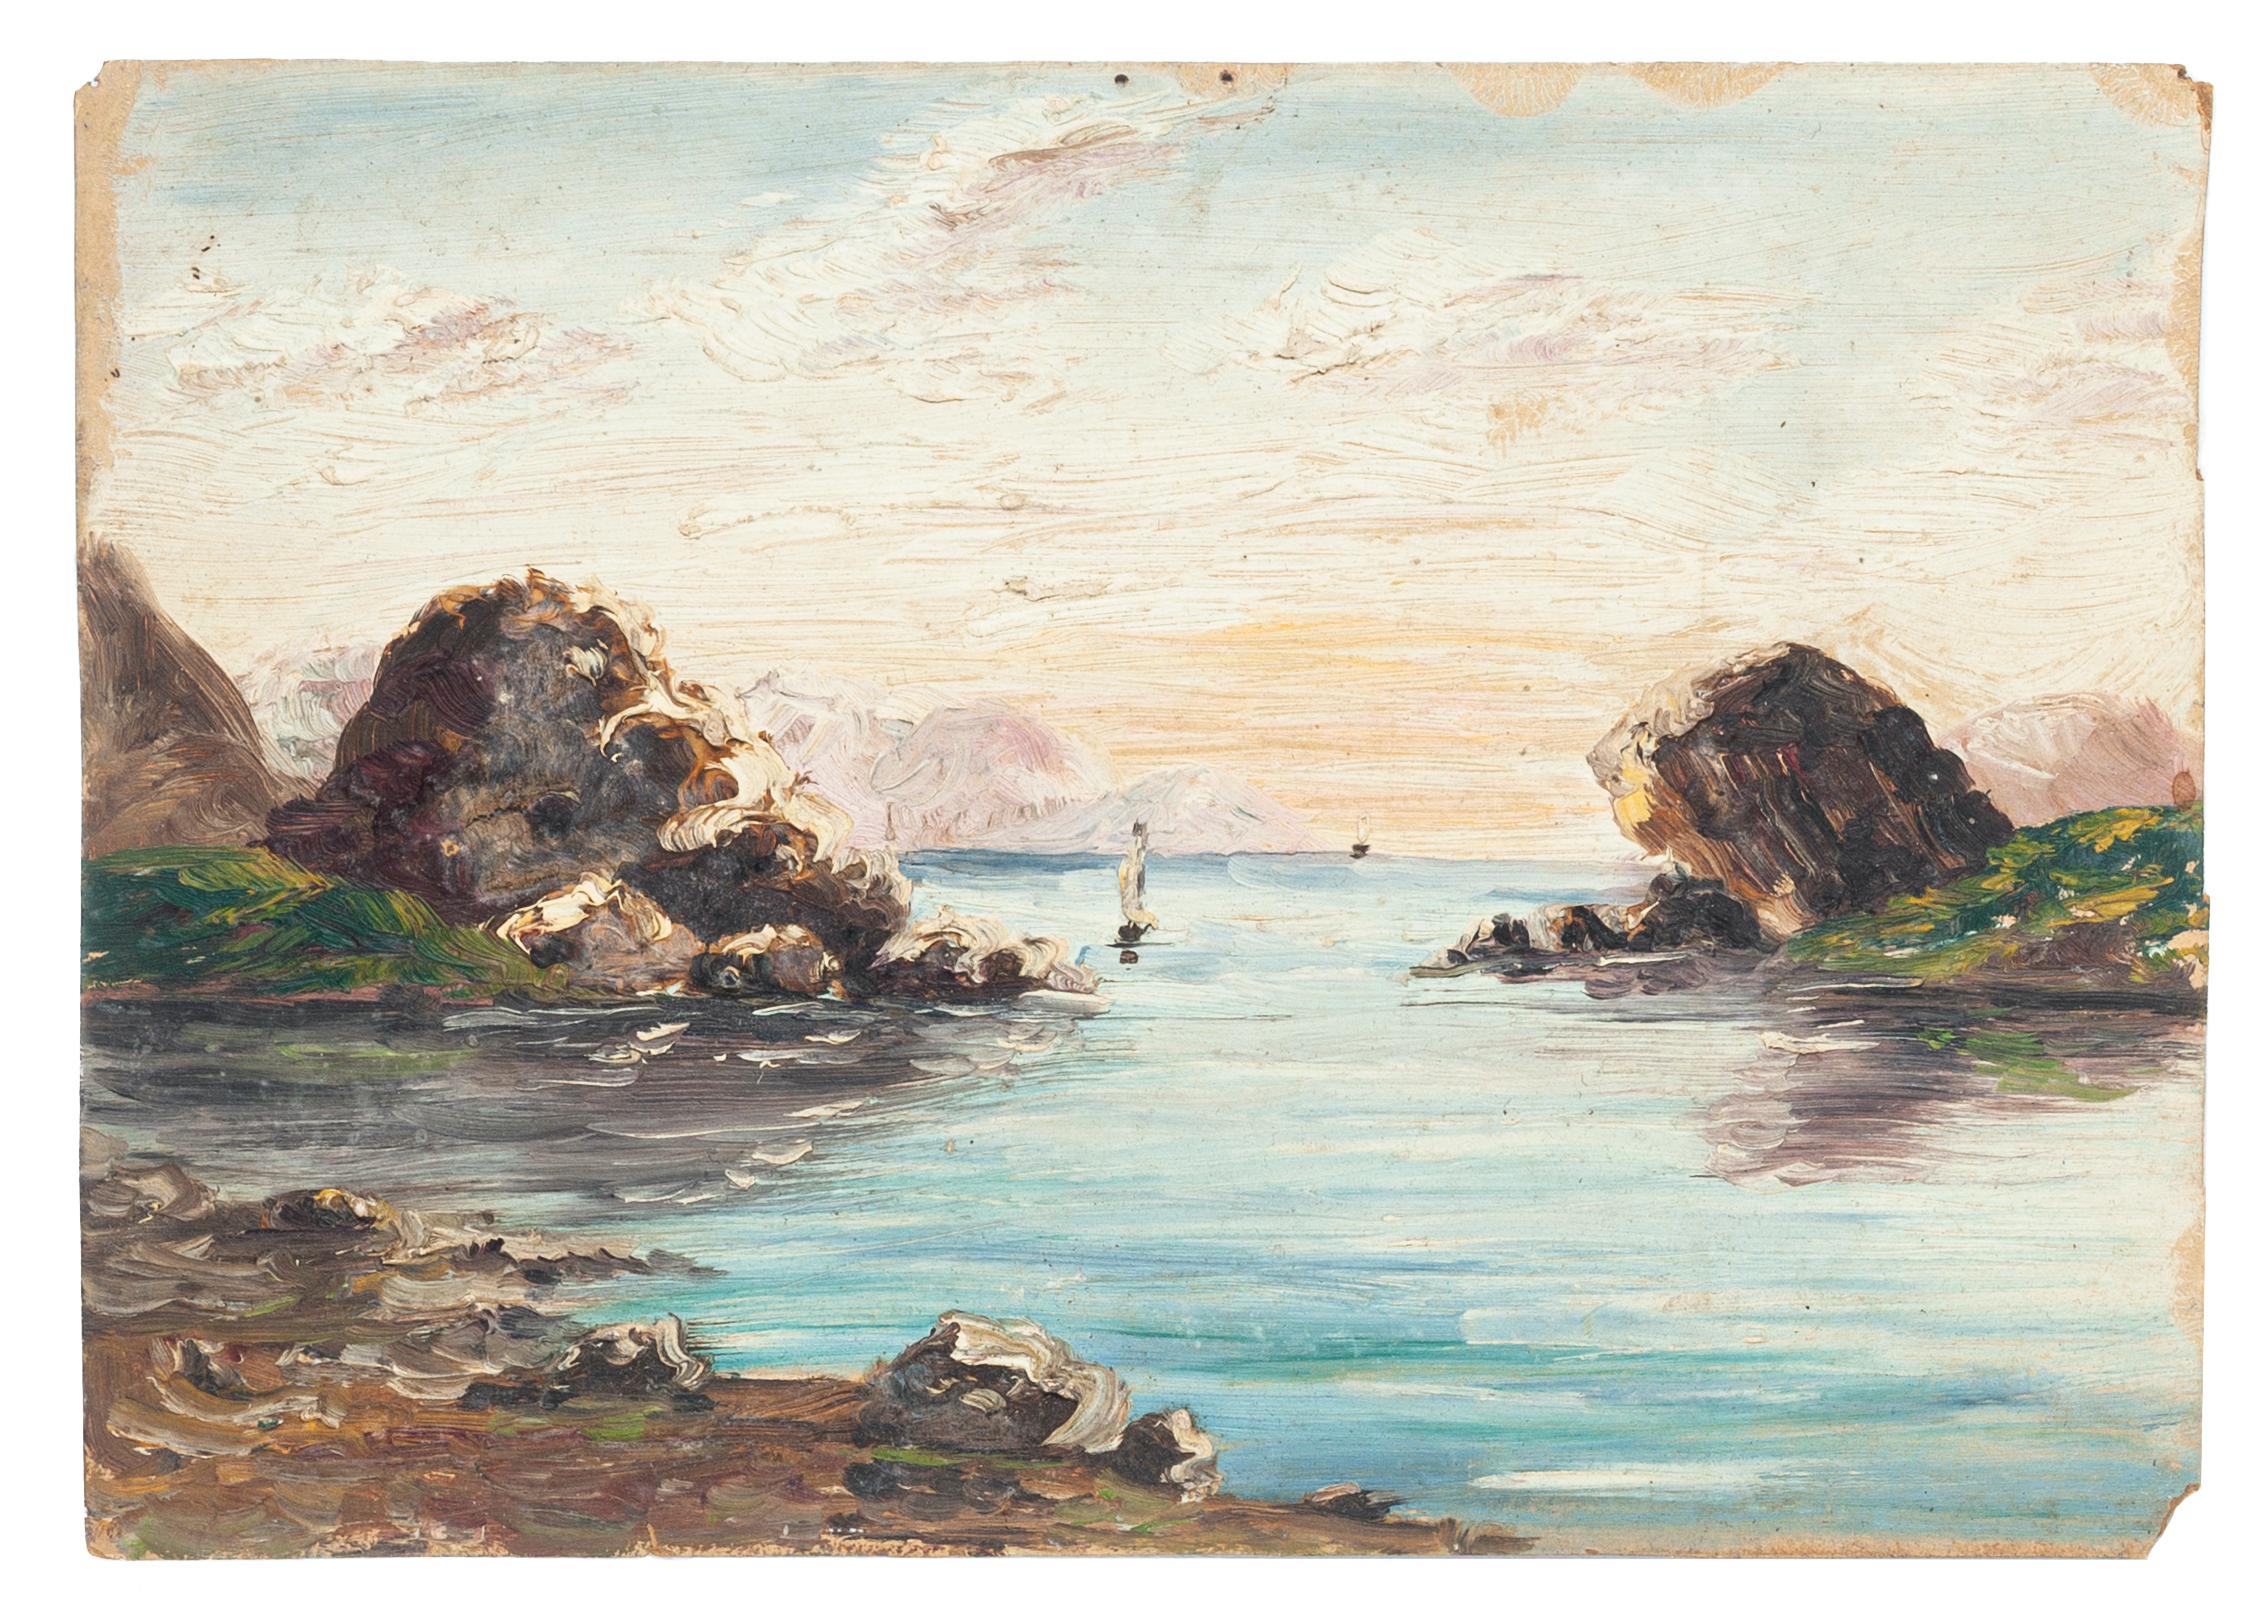 Unknown Landscape Painting - Marine Landscape - Oil on Carboard - 19th Century